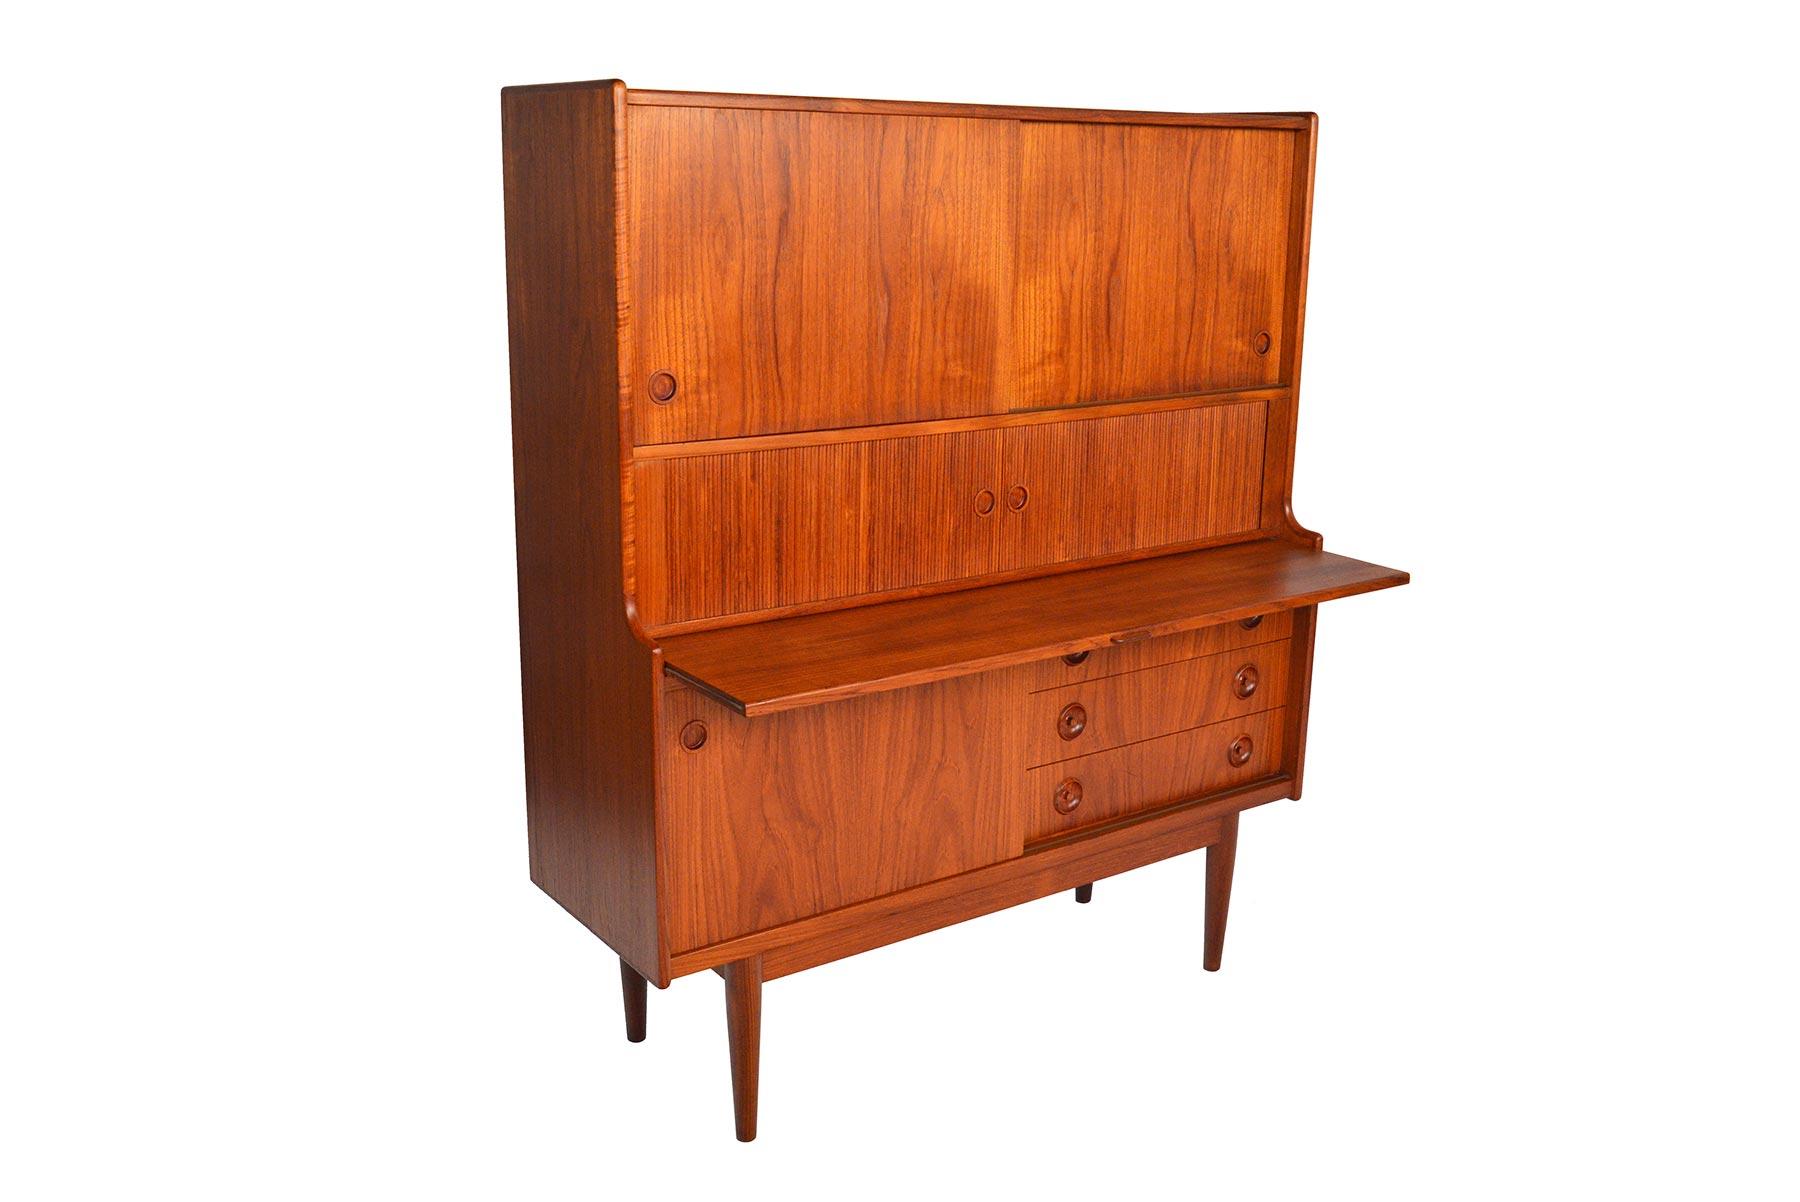 This tall Danish modern teak credenza by Johannes Sørth for J. Skaaning and Søn is outfitted with all the bells and whistles! Two upper sliding doors open to reveal two bays with three drawers and two adjustable shelves. The center features two